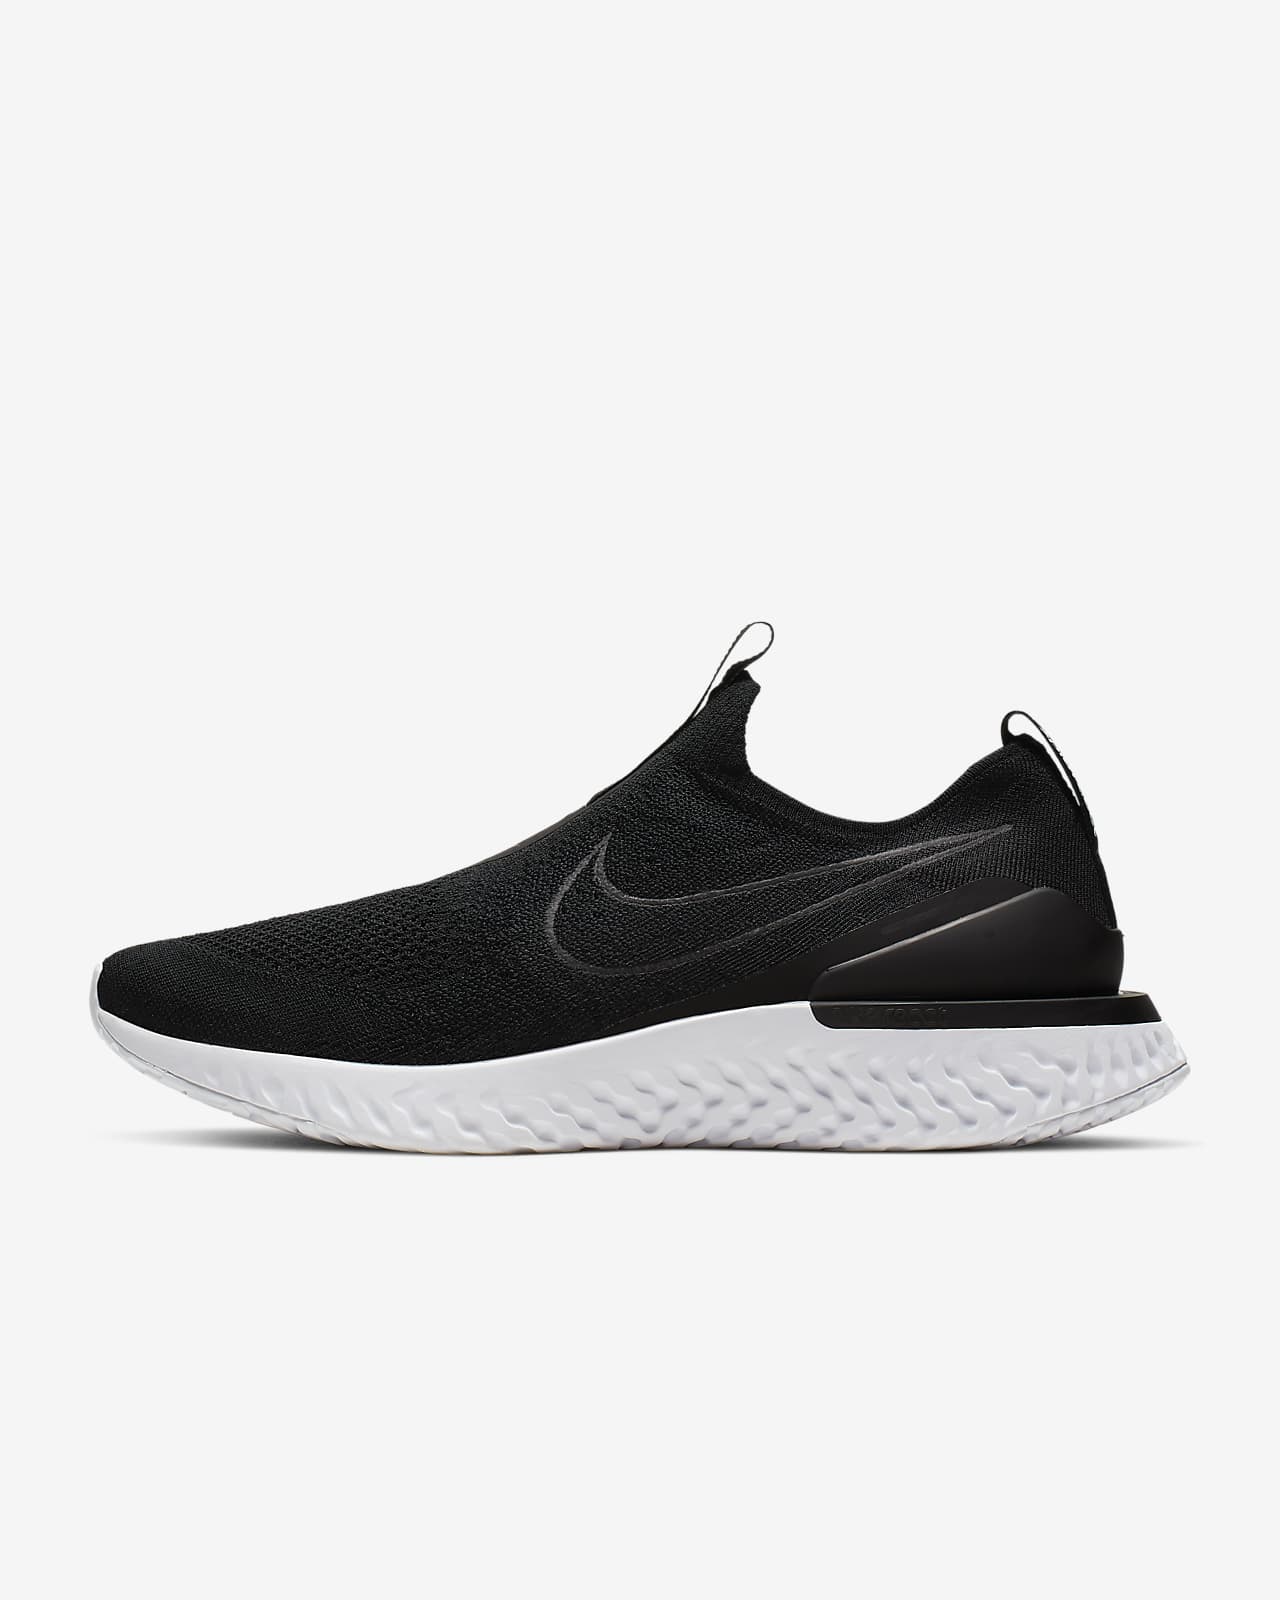 Epic React Flyknit Black And Grey | lupon.gov.ph